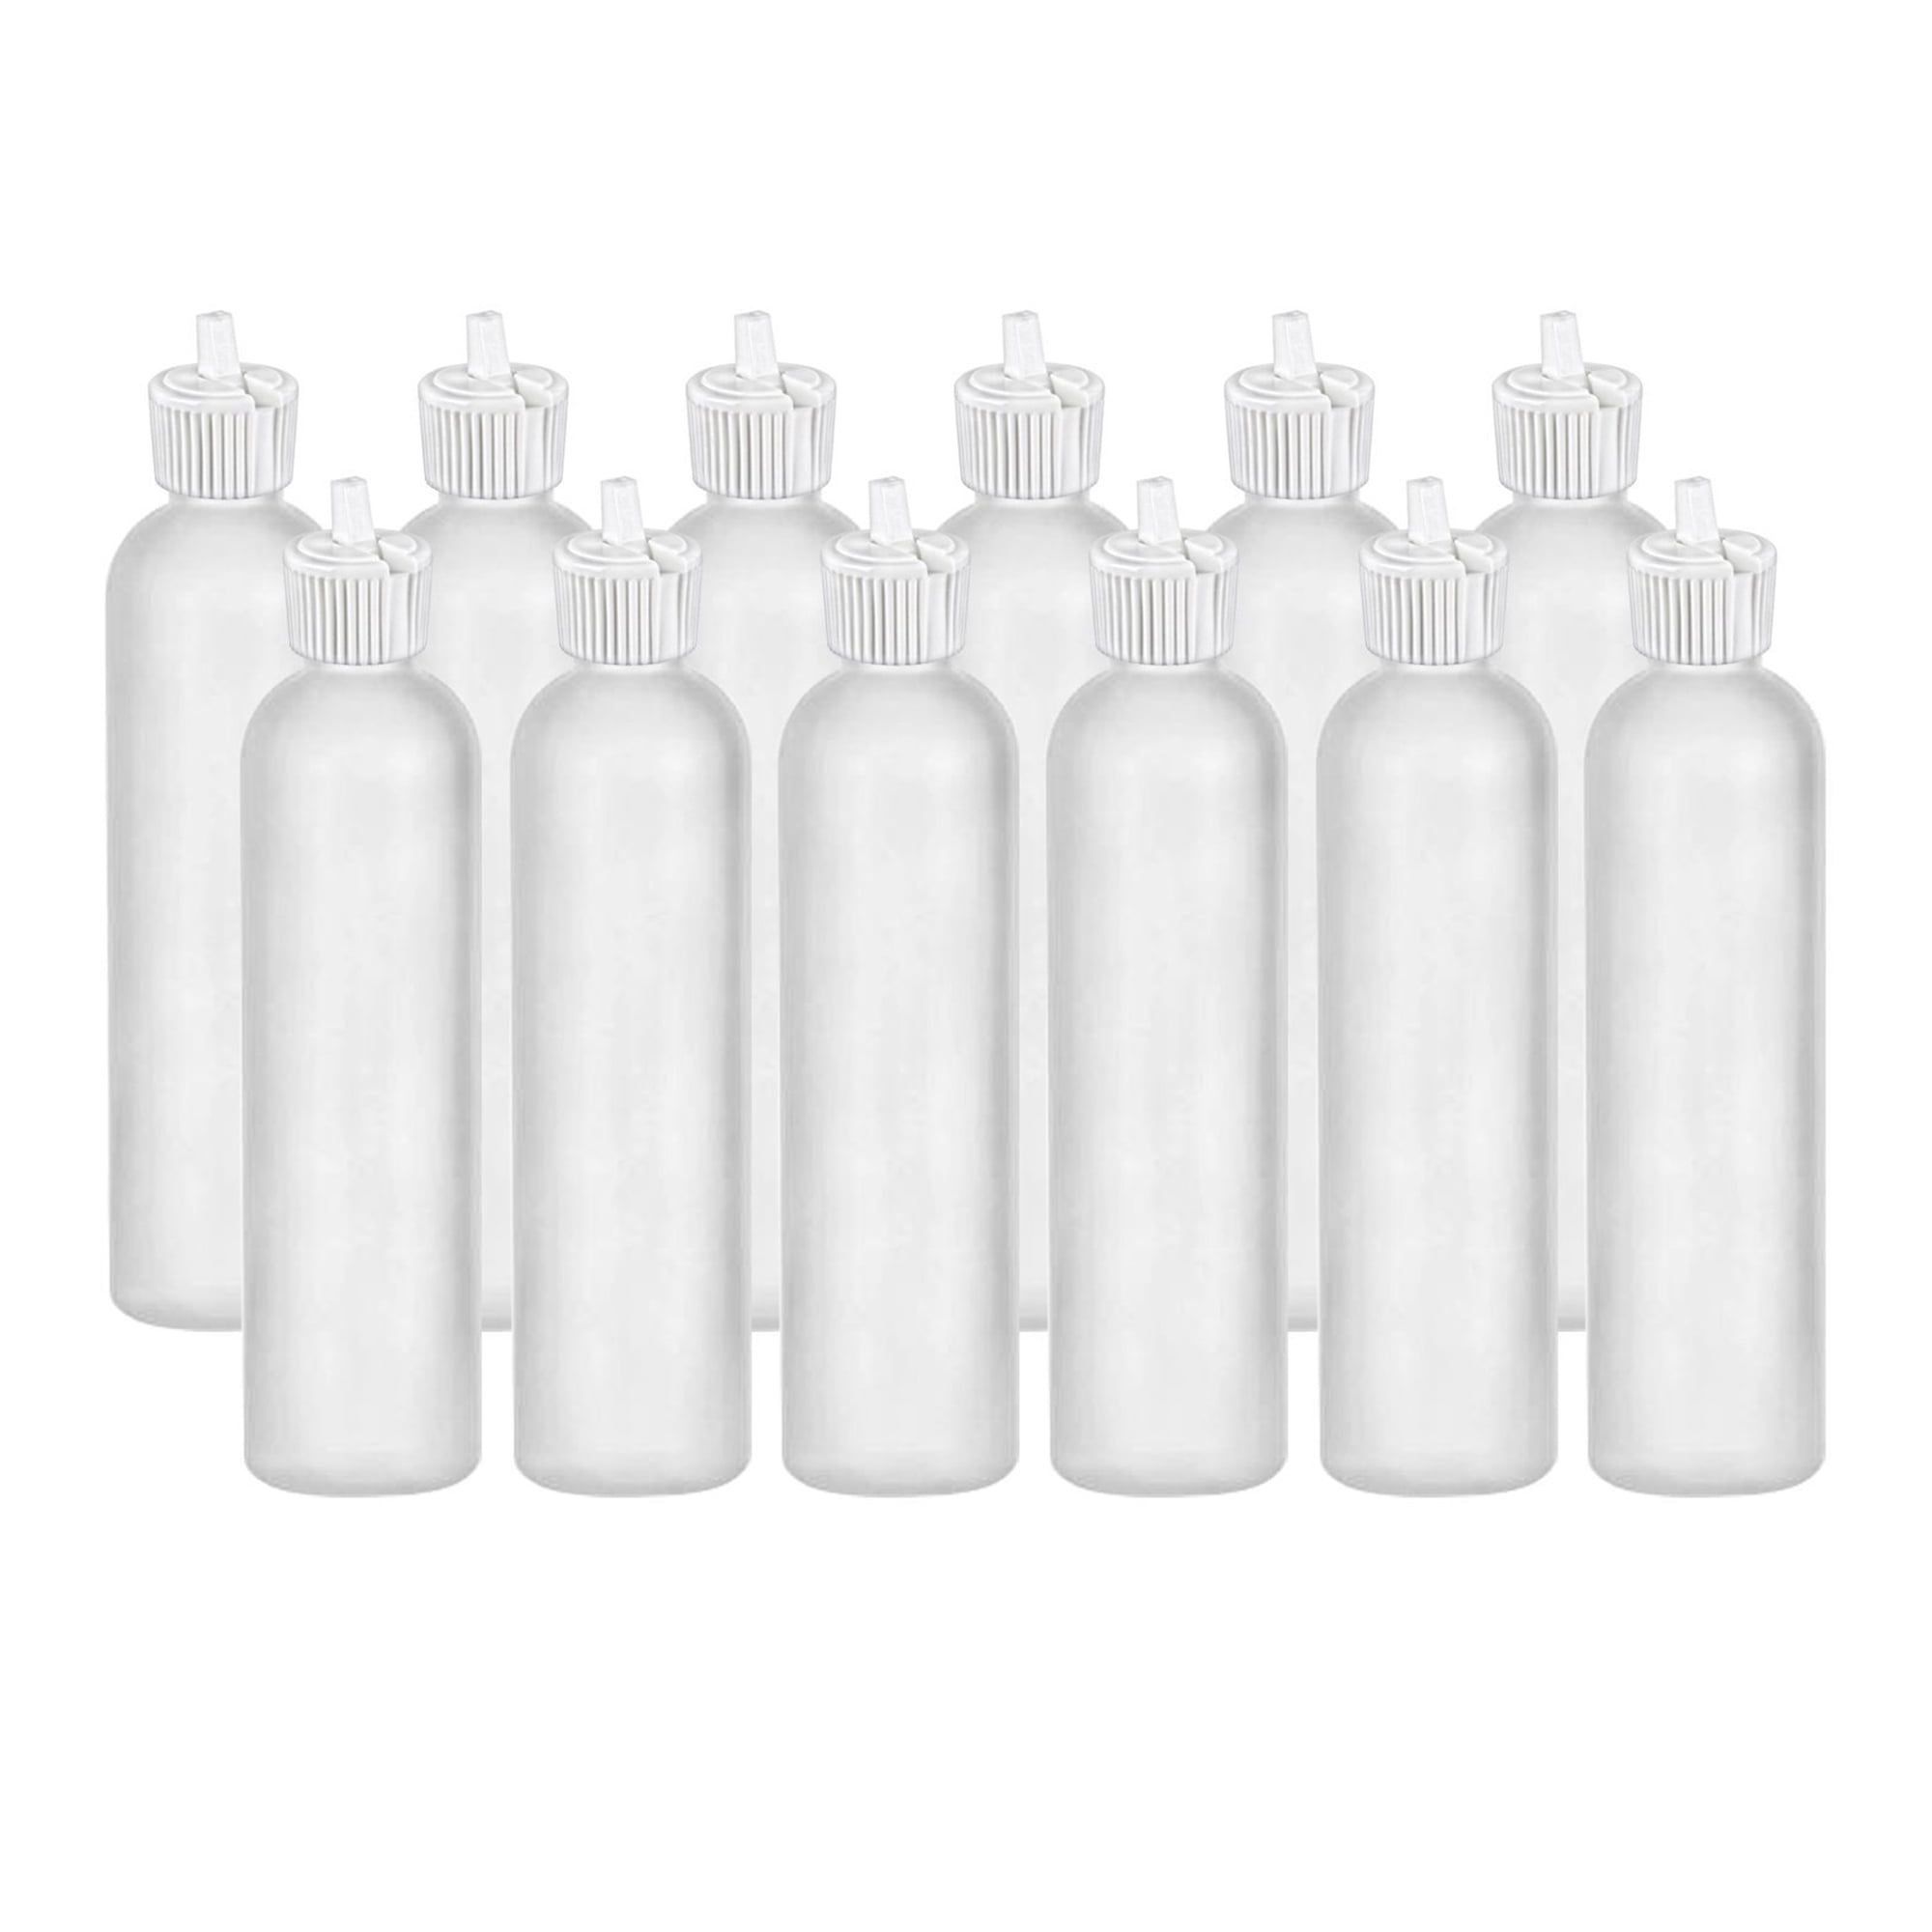  MoYo Natural Labs 4 oz Squirt Bottles, Squeezable Empty Travel  Containers, BPA Free HDPE Plastic for Essential Oils,Liquids,Toiletry/Cosmetic  Bottles(Neck 20-410) (Pack of 6, HDPE Translucent White) : Everything Else